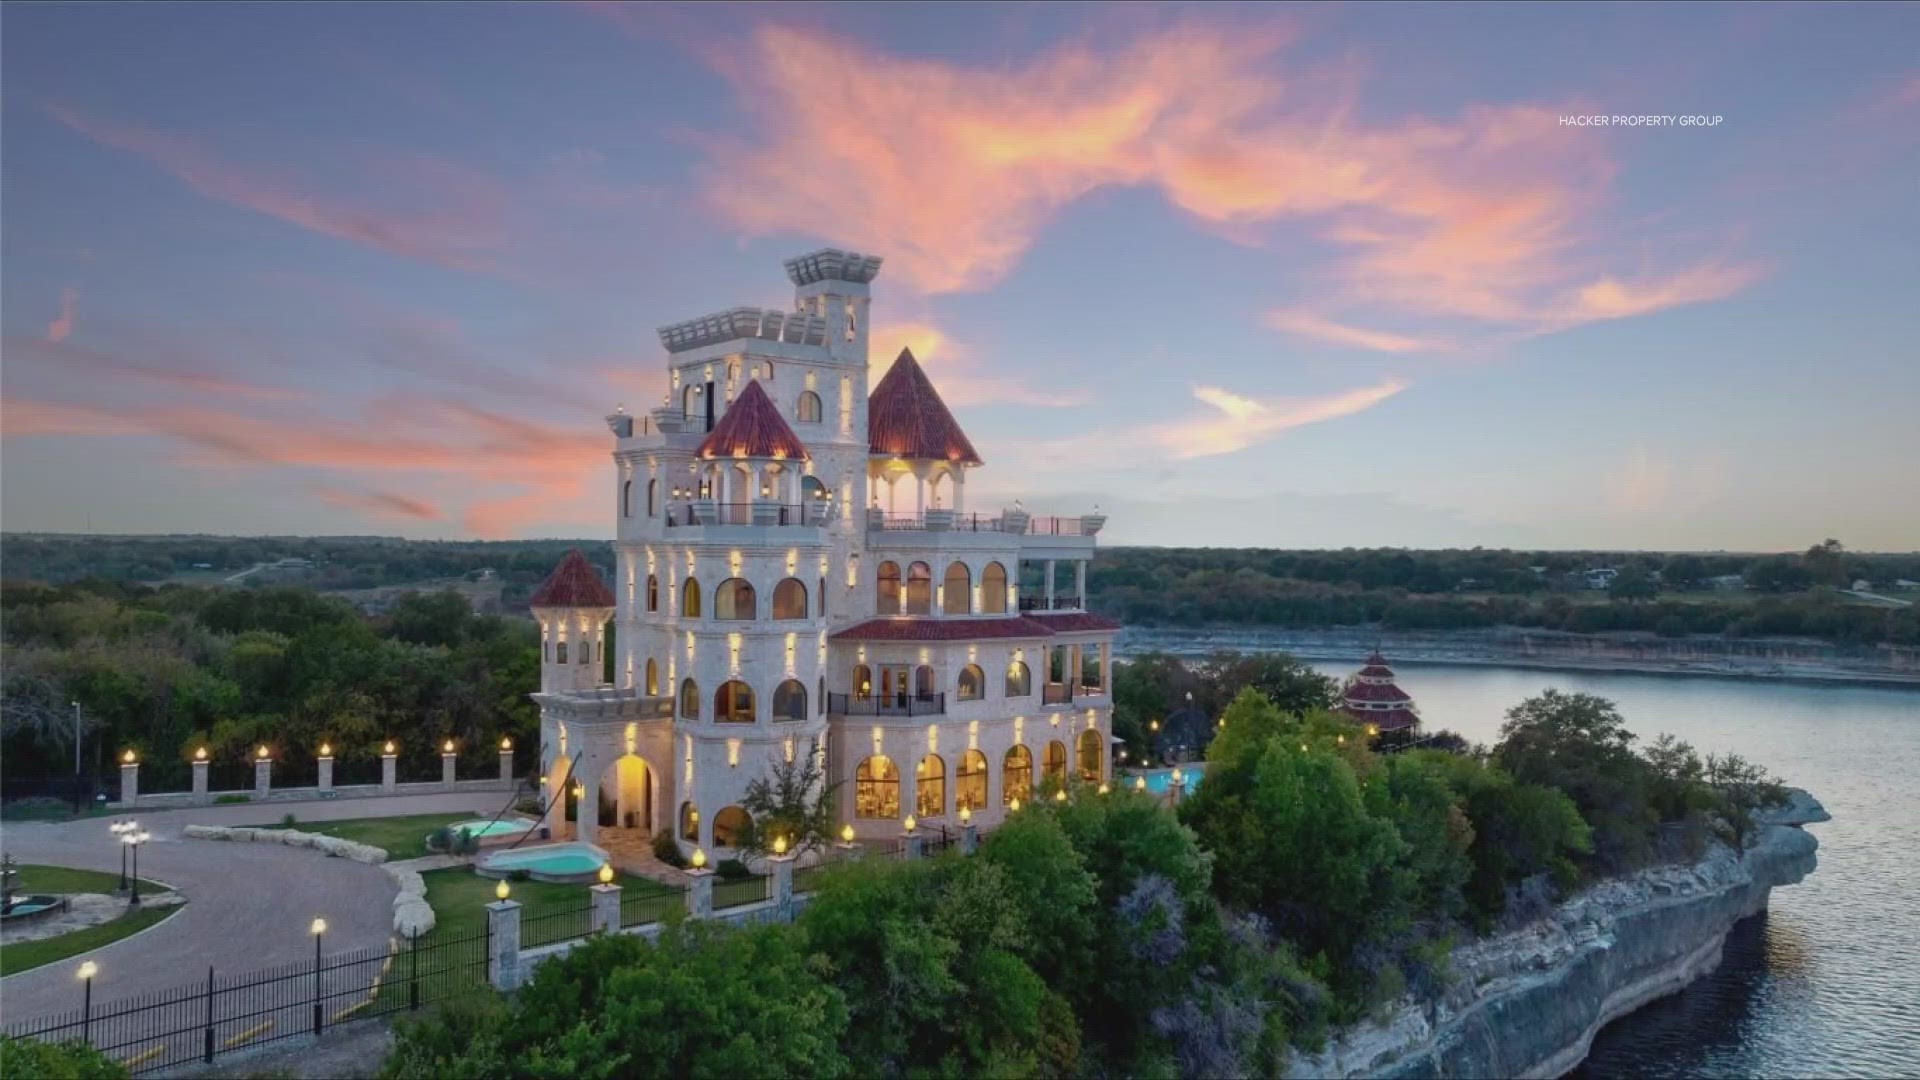 The castle has 11,134 square feet of living space, including 10 bedrooms and 15 bathrooms.